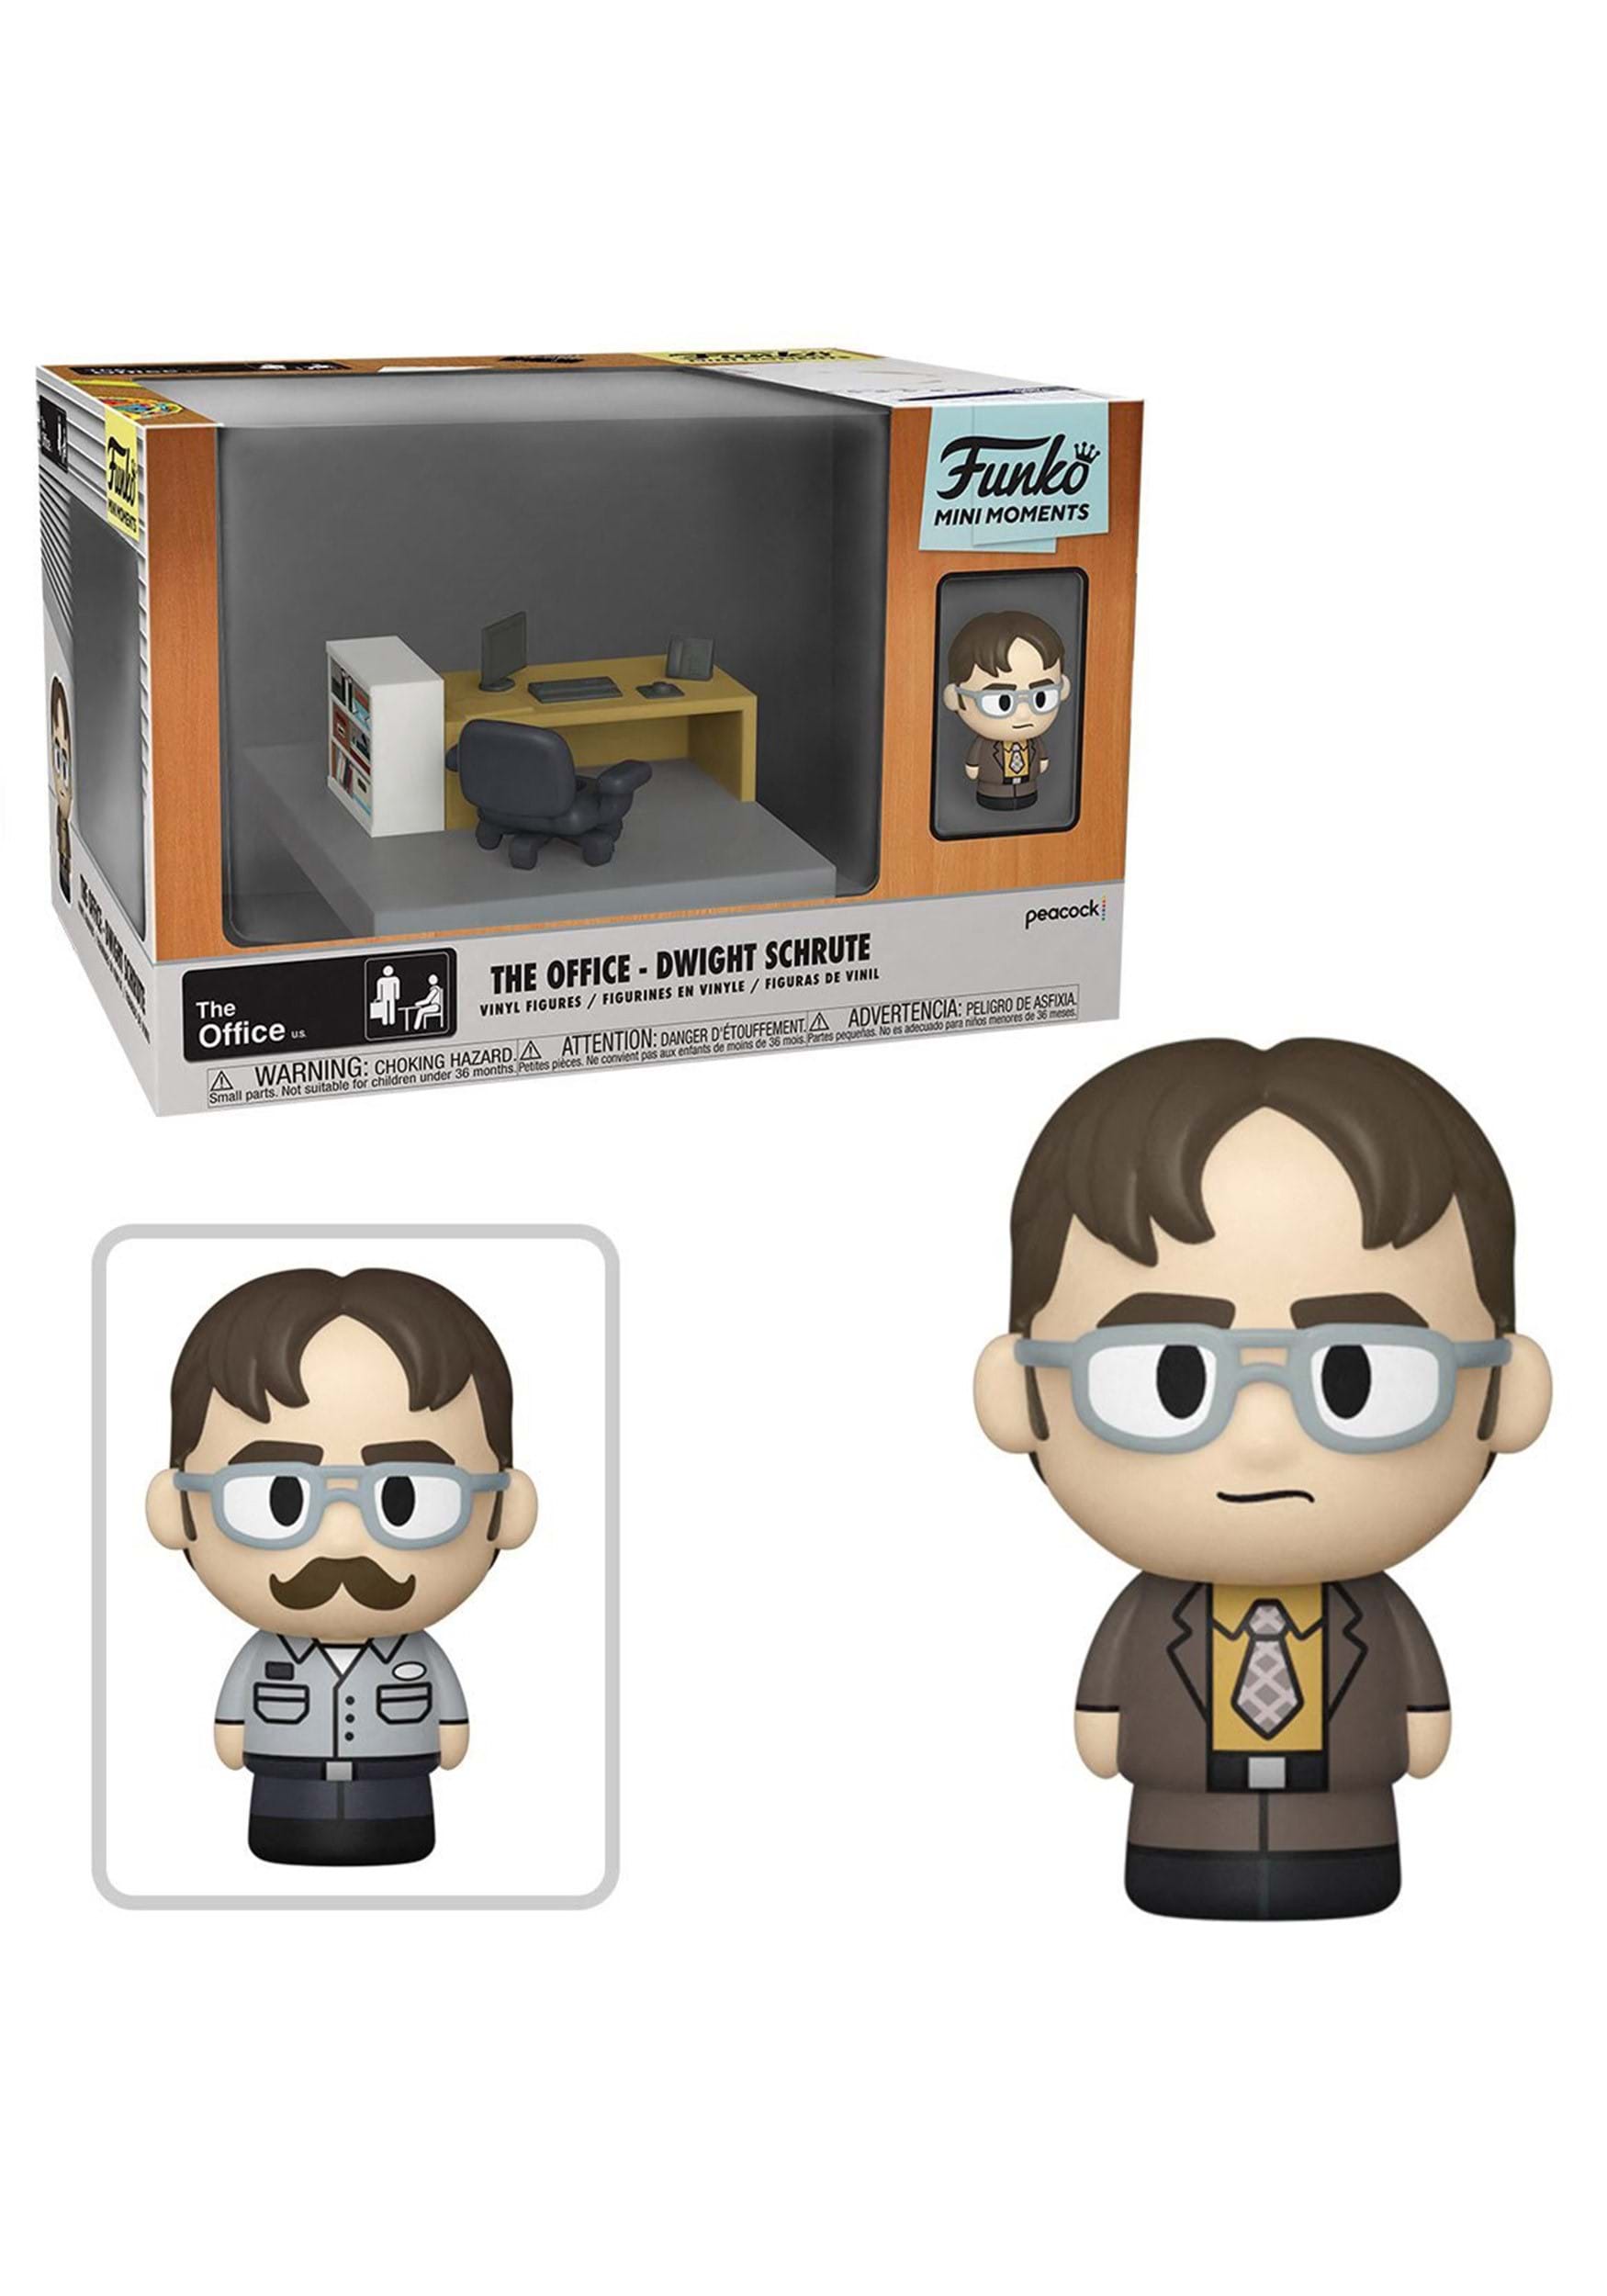 https://images.fun.co.uk/products/77507/1-1/funko-mini-moments-the-office-dwight-.jpg